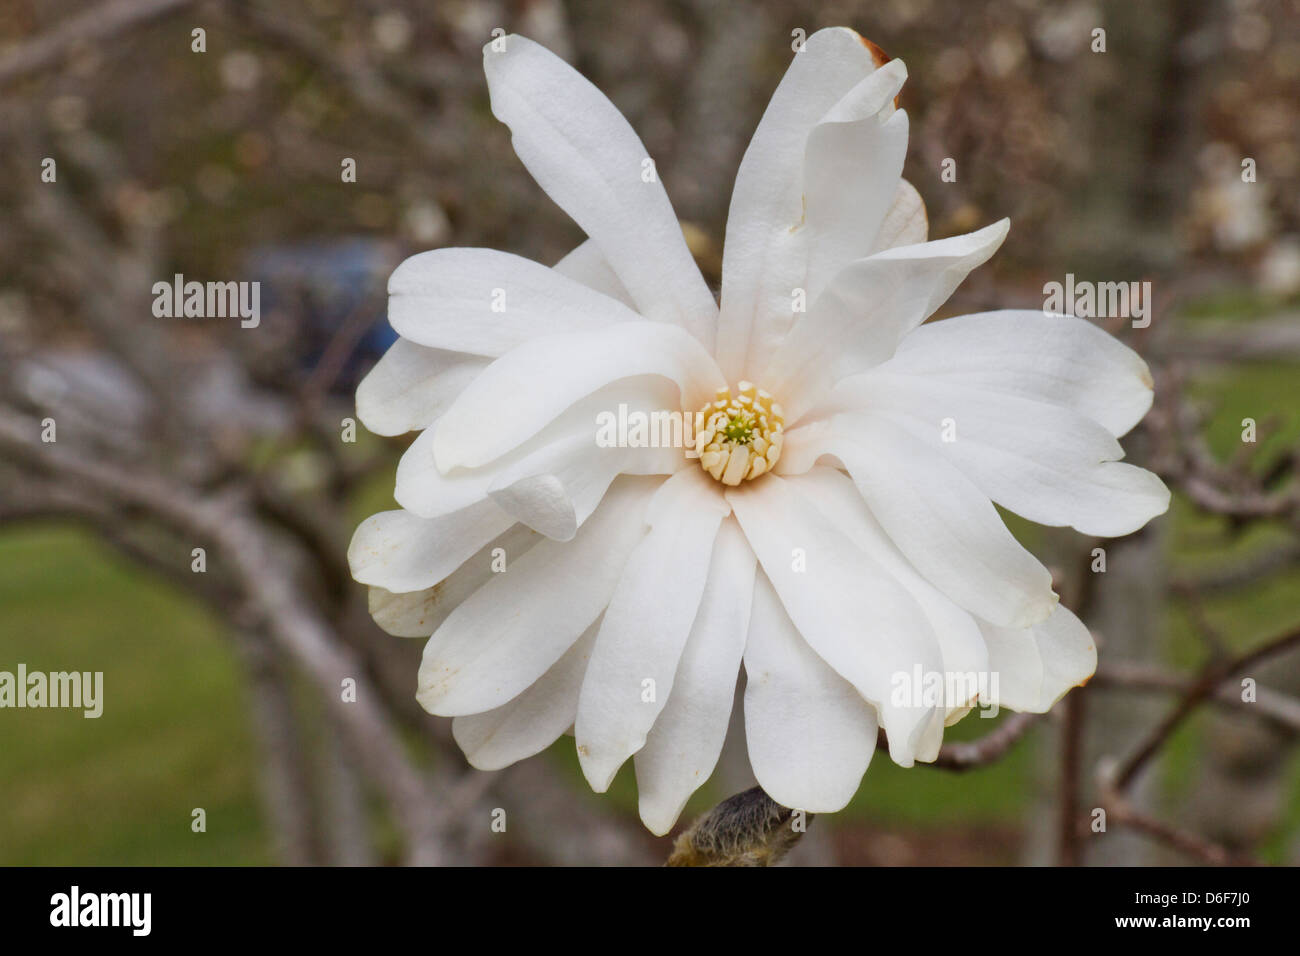 Close up of a fully open Royal Star Magnolia Tree flower Stock Photo